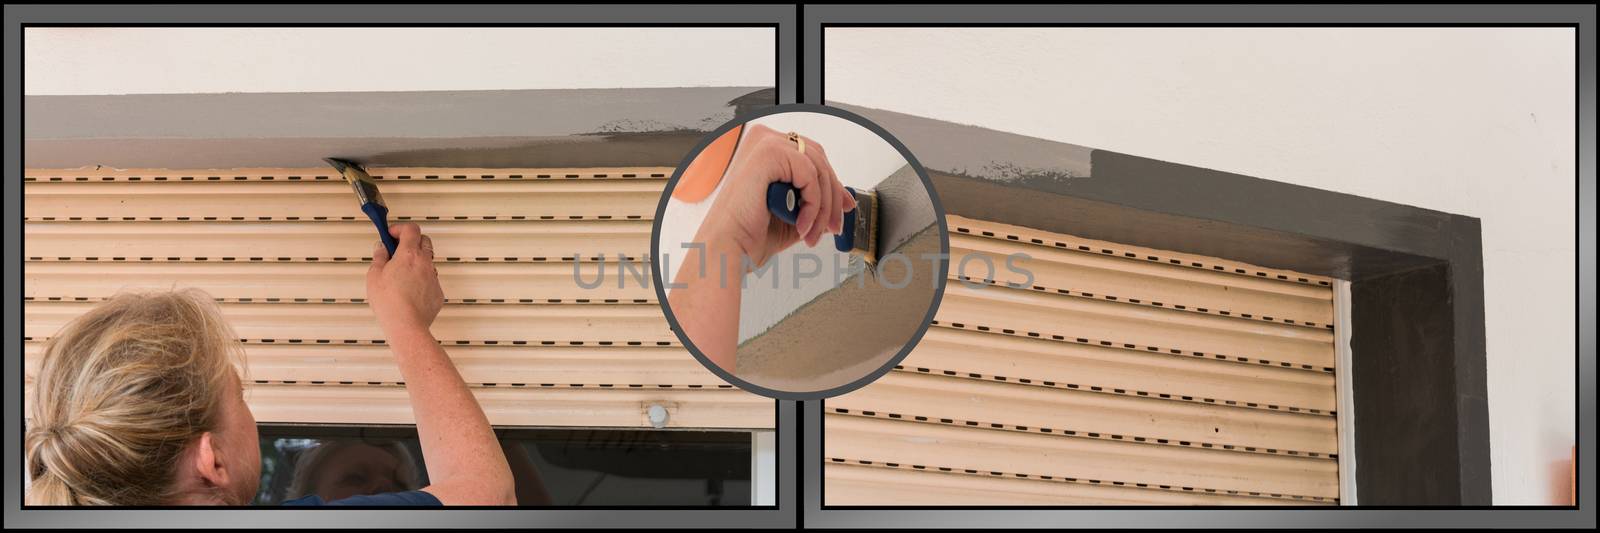 Woman stroking a house wall         by JFsPic